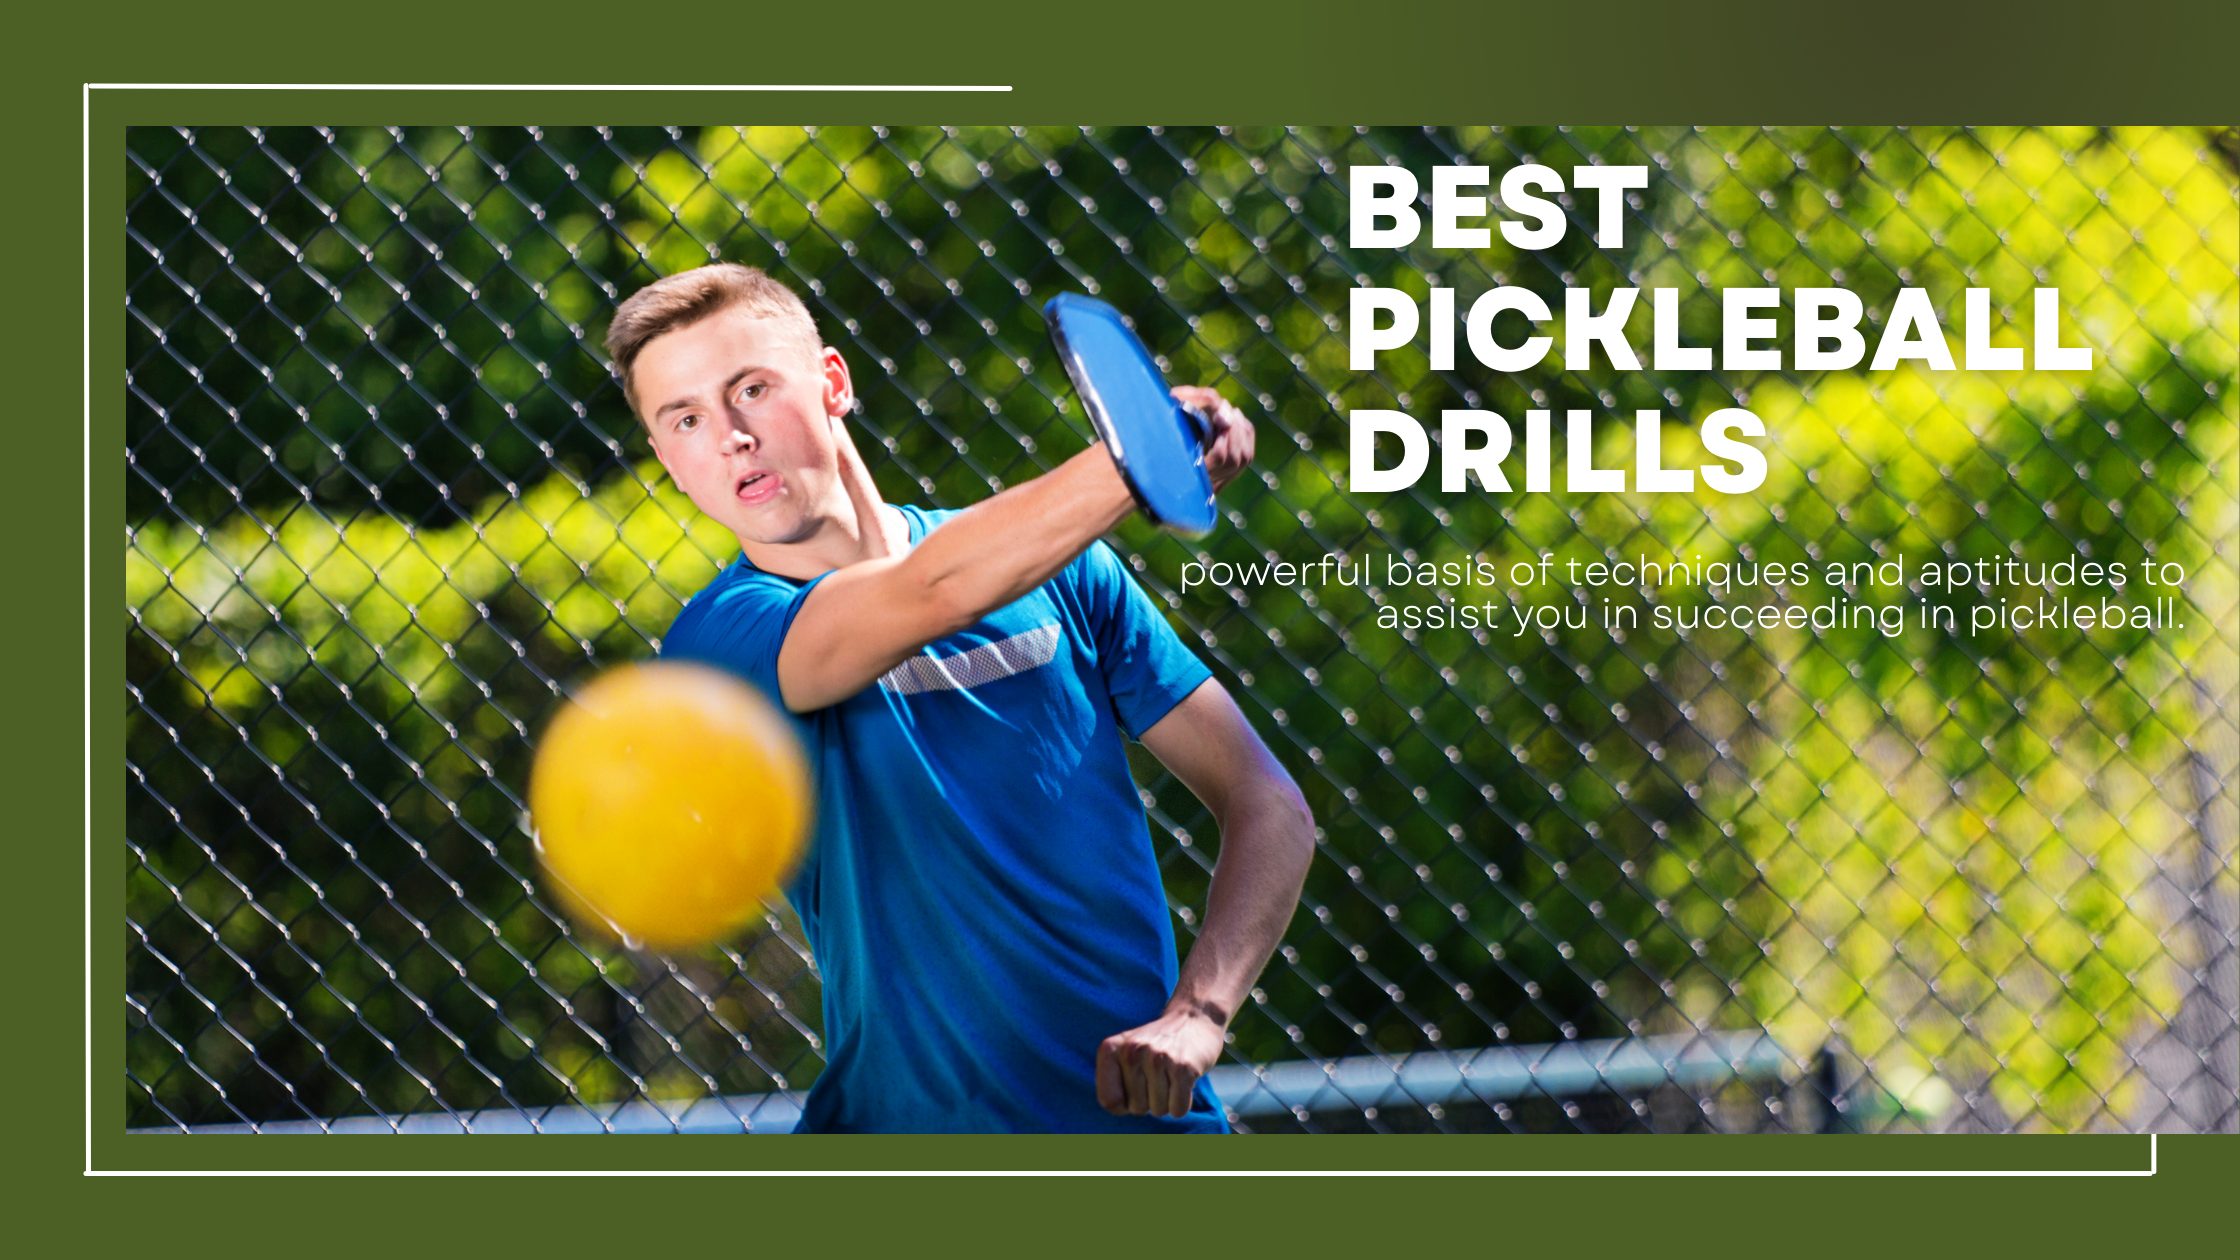 The 11 Best Pickleball Drills For Beginners And Advanced Players